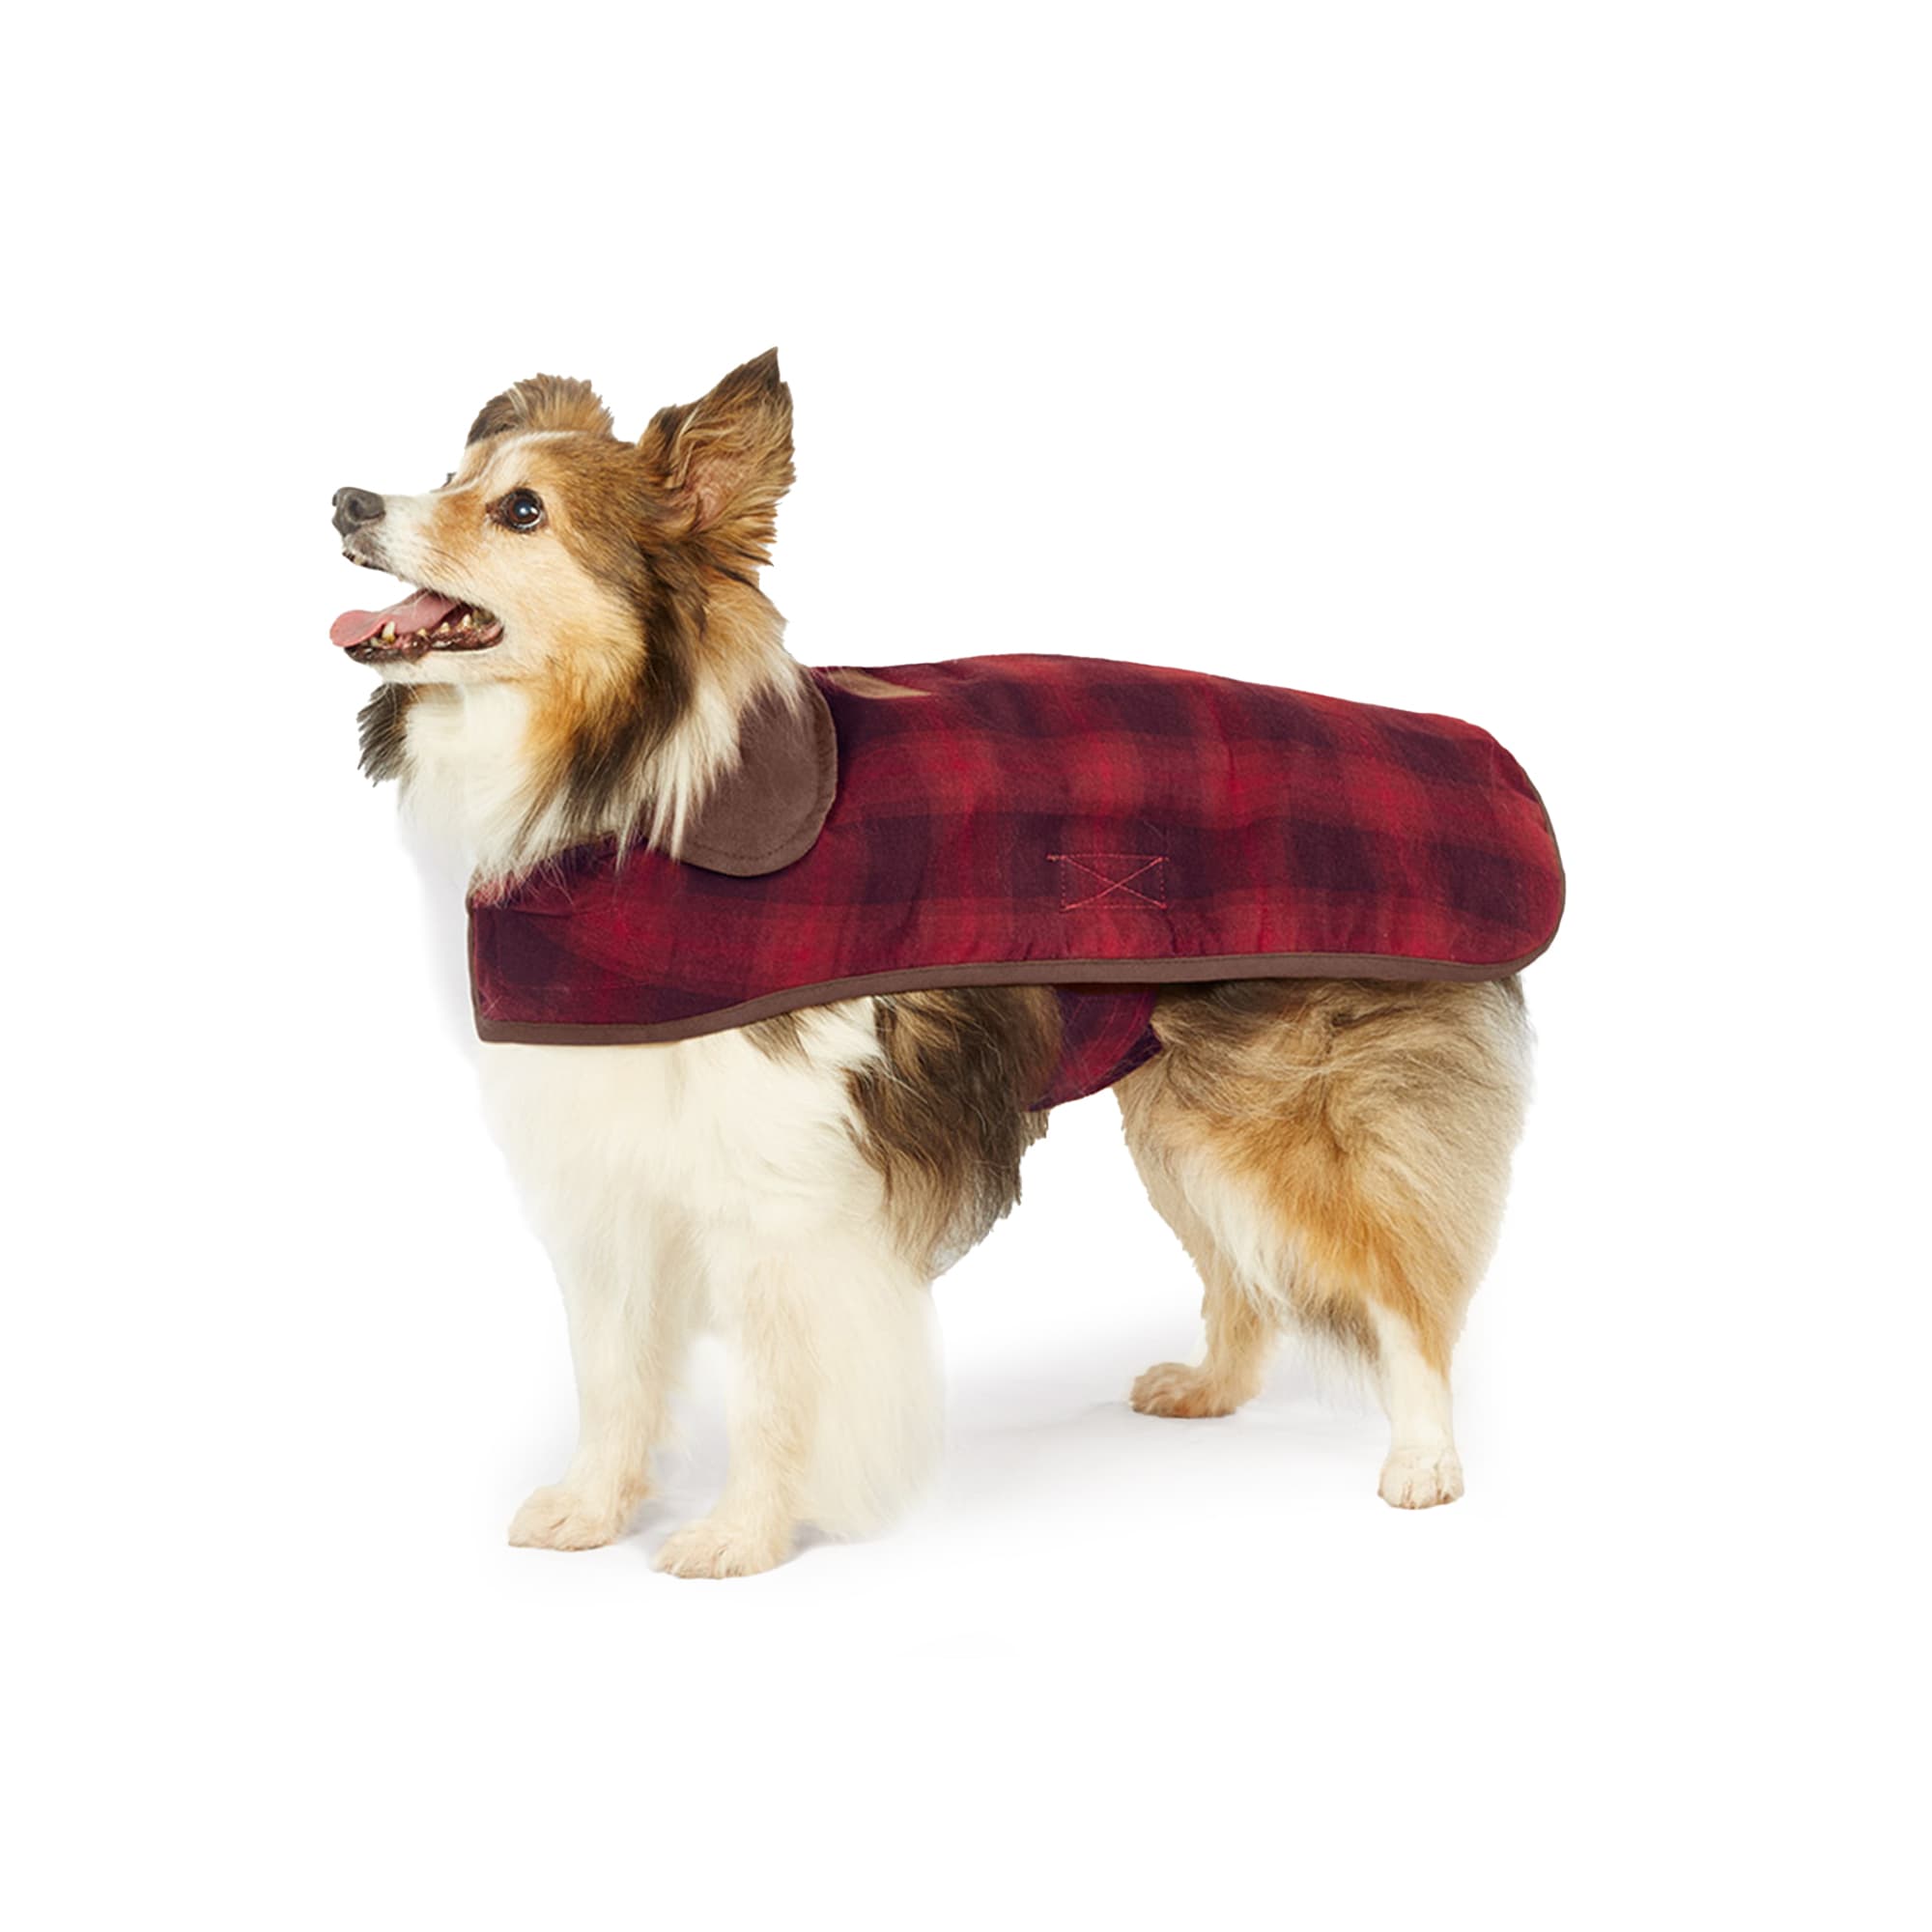 Photos - Dog Food Pendleton Red Ombre Plaid Dog Coat, Small, Red 0PP3002-RED 